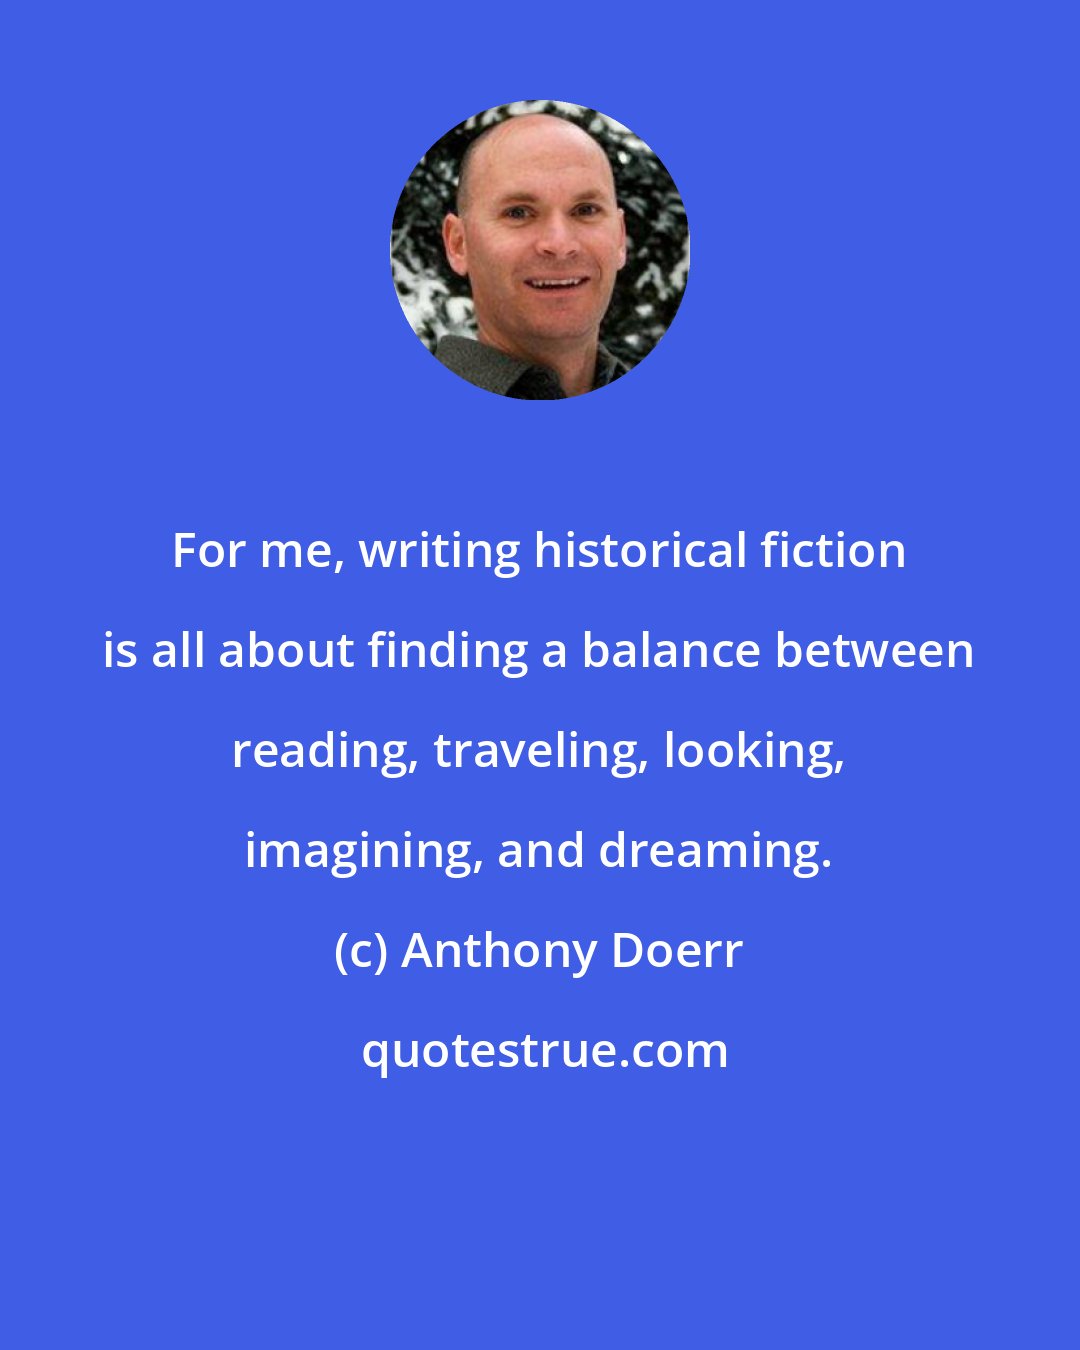 Anthony Doerr: For me, writing historical fiction is all about finding a balance between reading, traveling, looking, imagining, and dreaming.